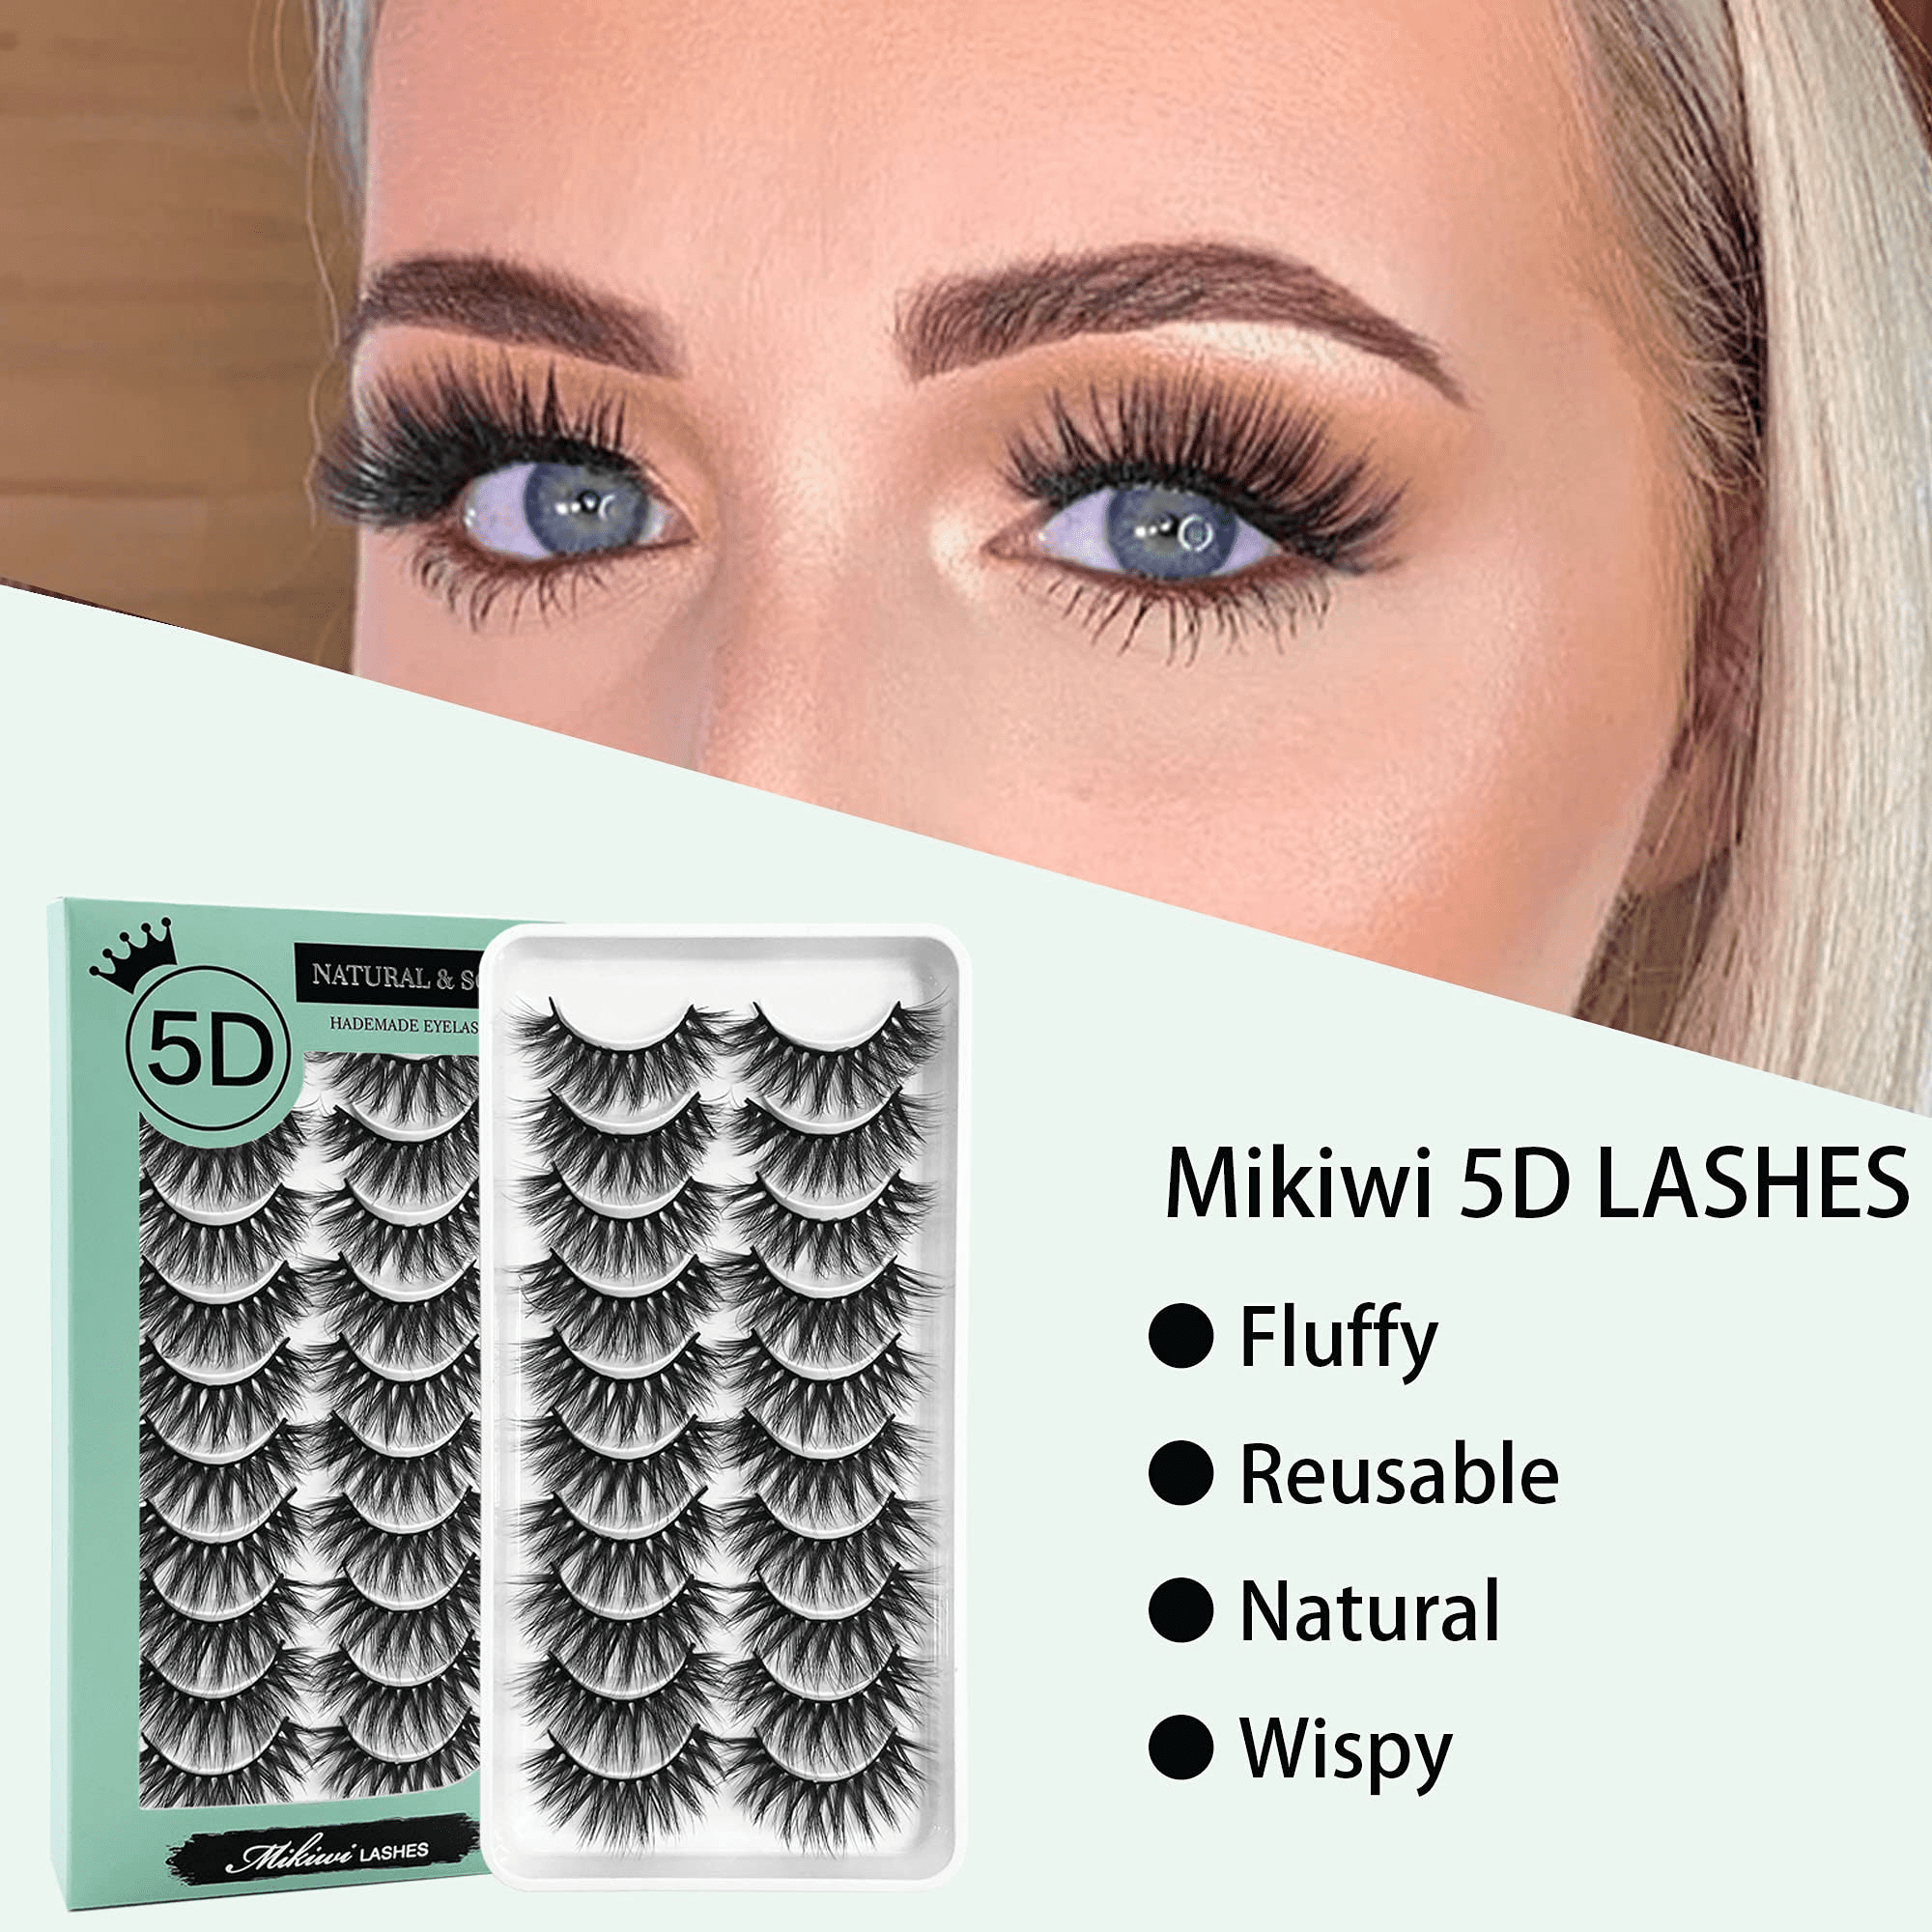 AUGENLI Natural Look Manga Lashes 15mm Japanese Style Wispy Eyelashes  Reusable for Cosplay Anime Makeup and Daily Wearring 5Pair (7 clusters)